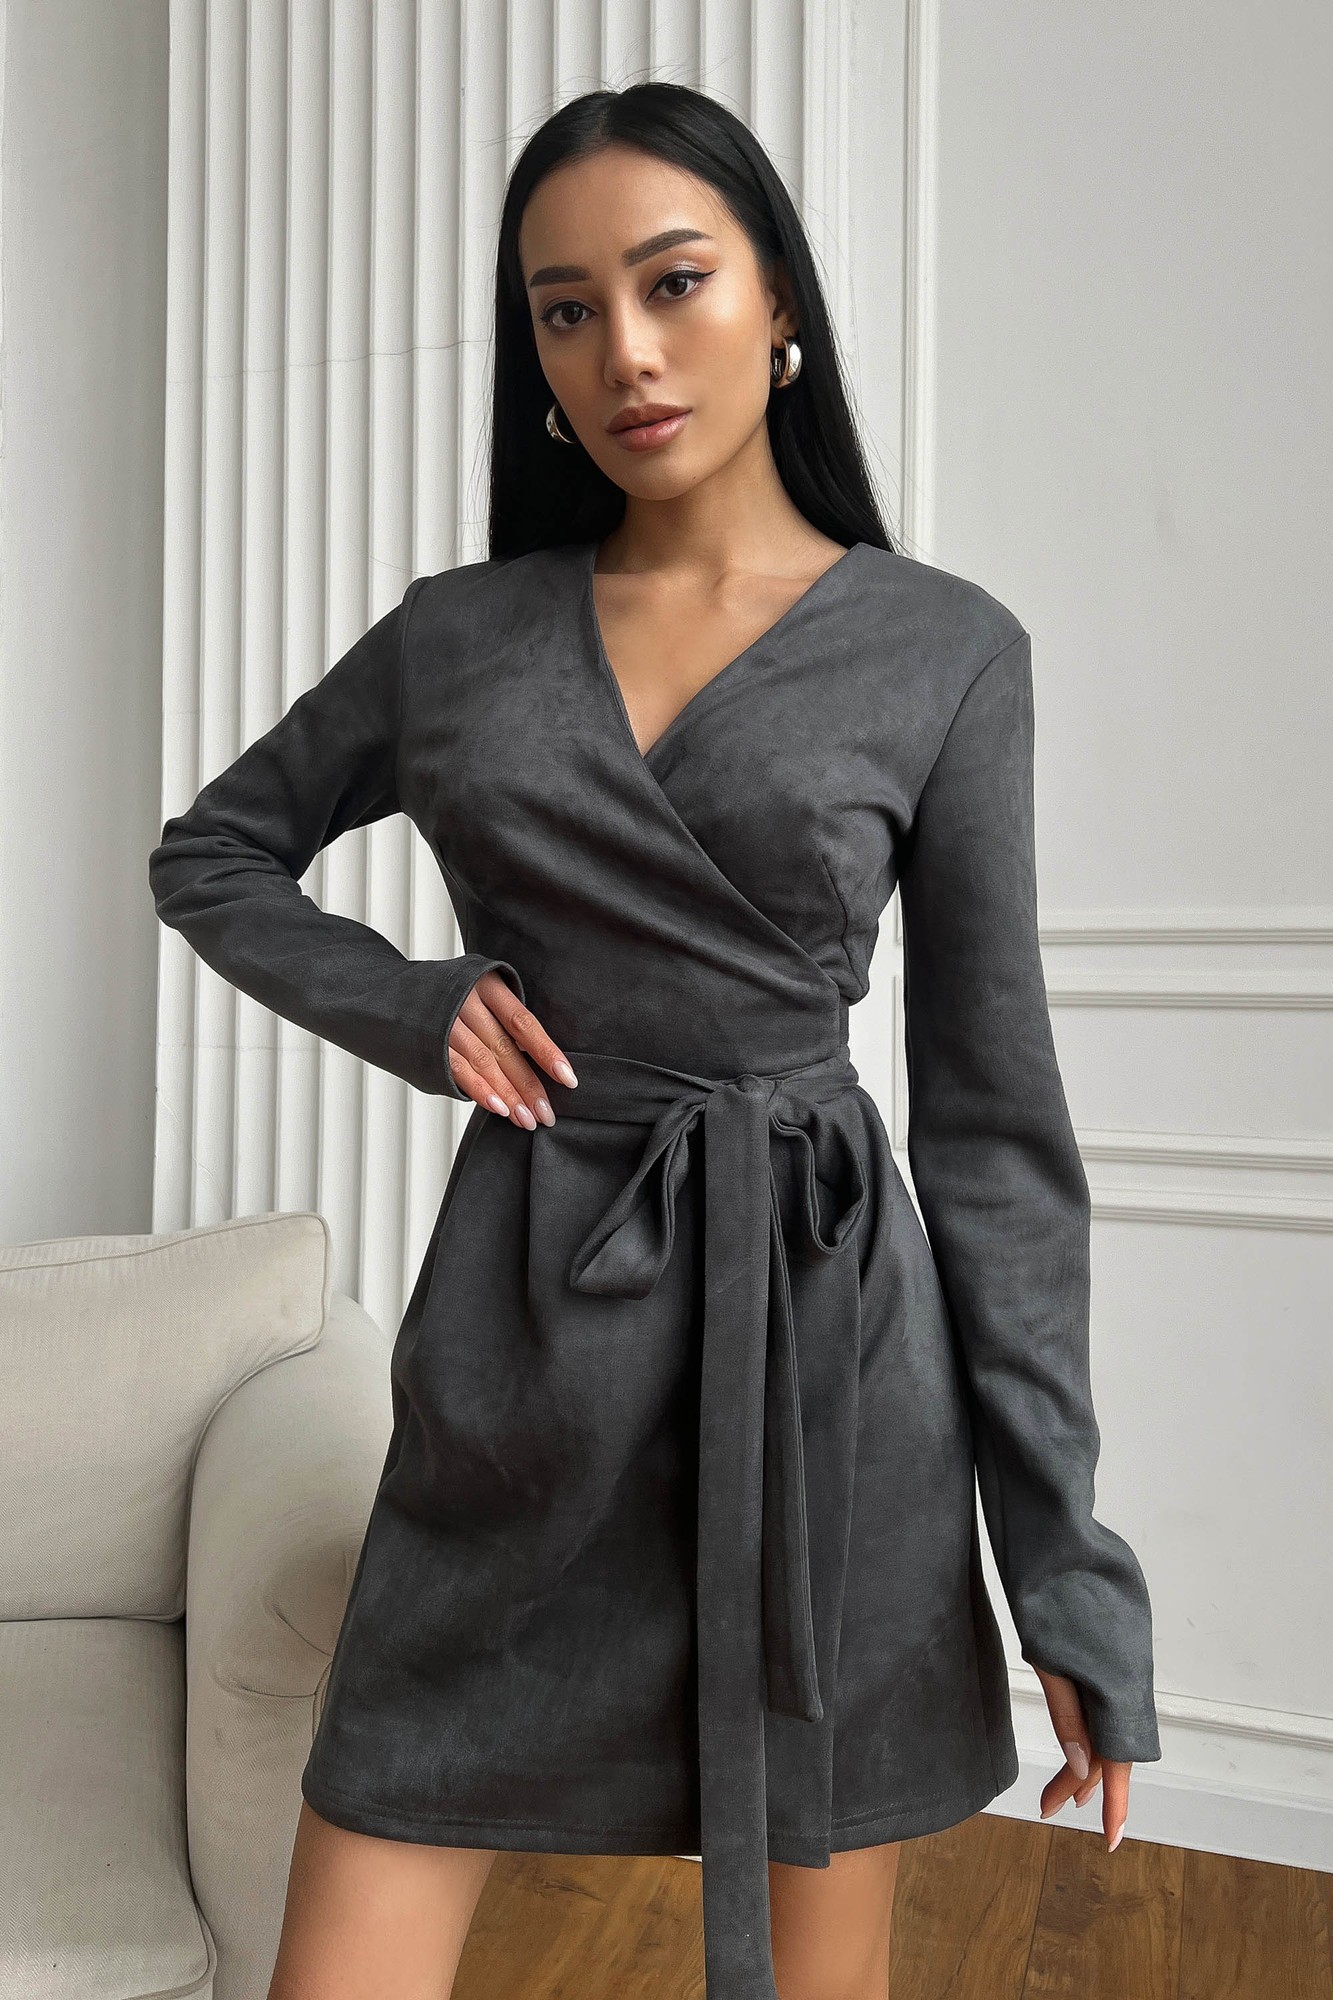 Elegant smelling dress made of artificial suede in gray color